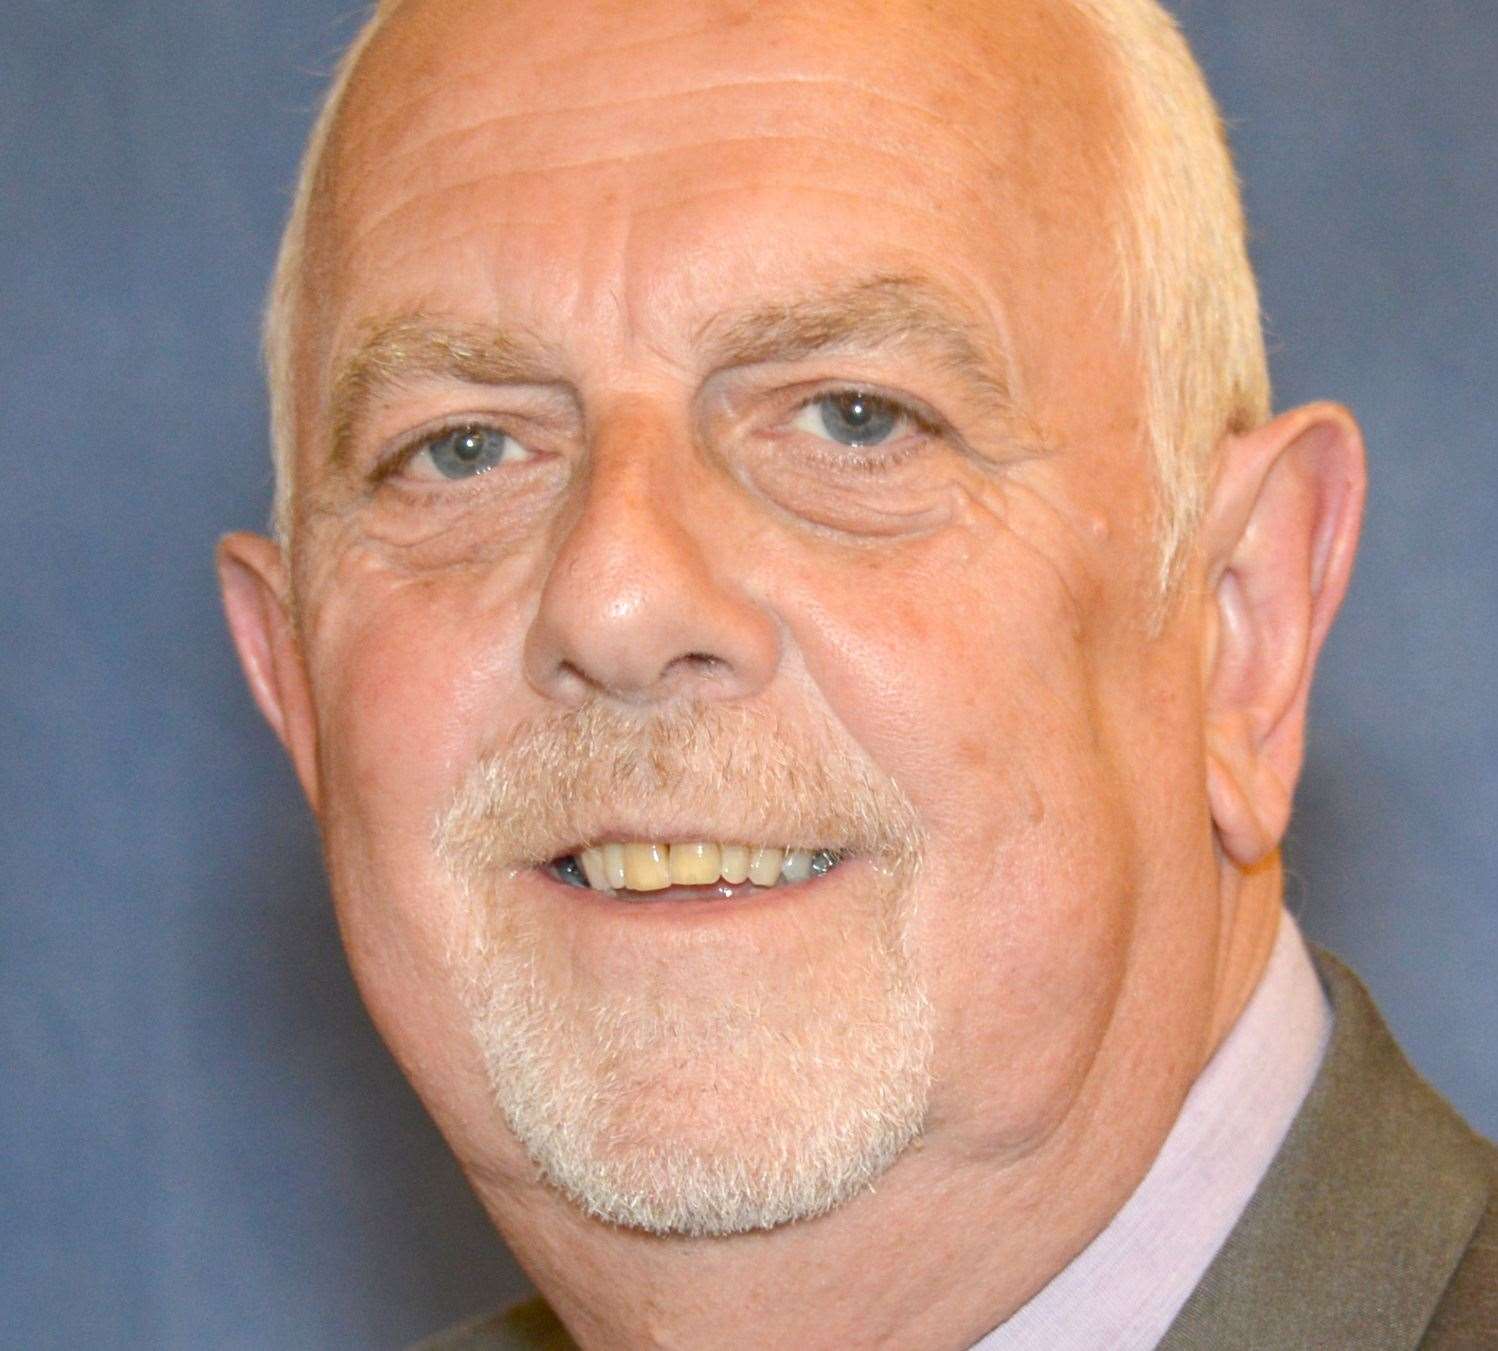 Cllr Colin Spooner resigned from the Tories in February